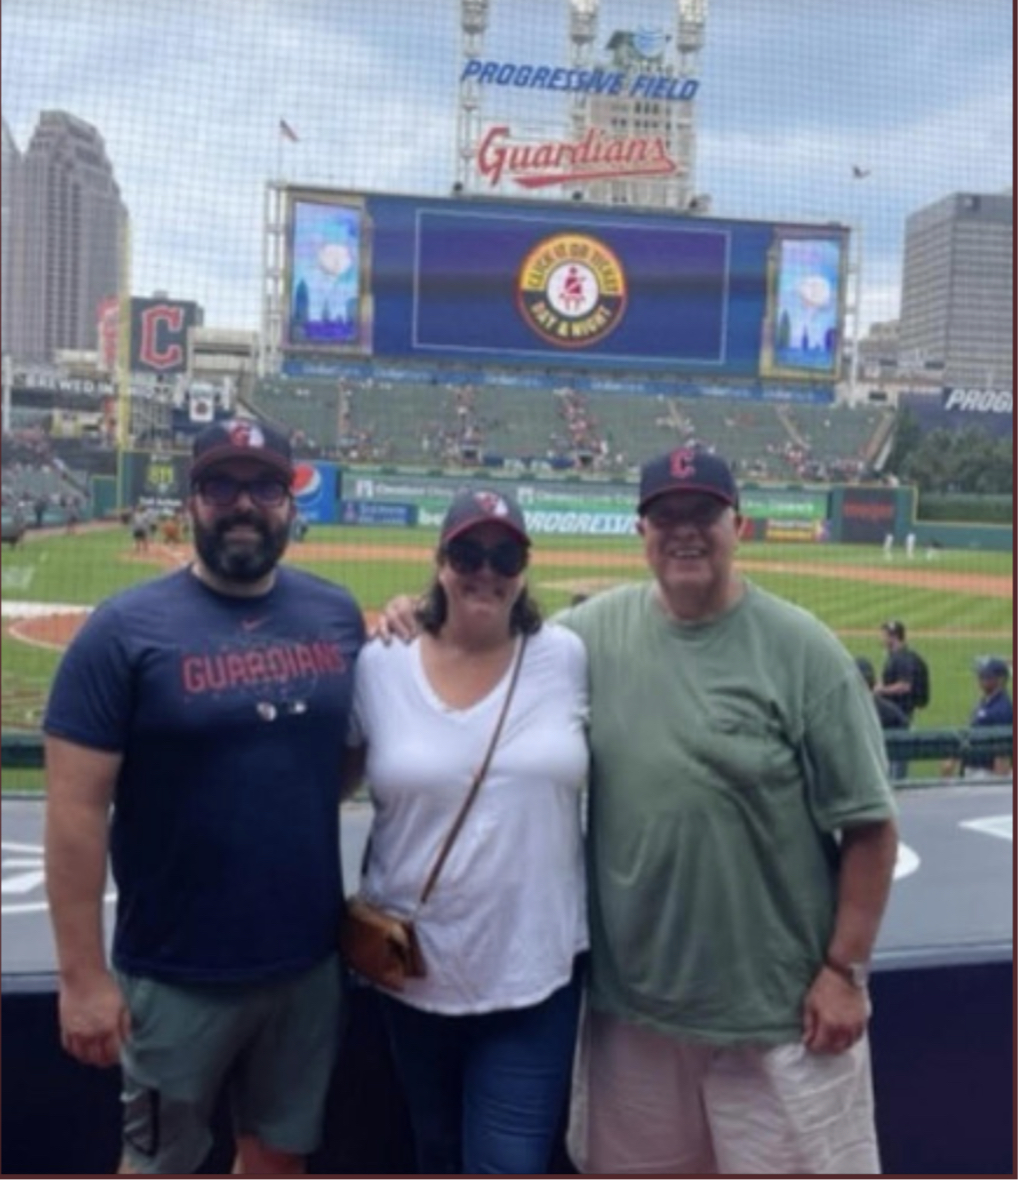 The Hernandez family attended a Cleveland Guardians game this summer at Progressive Field.